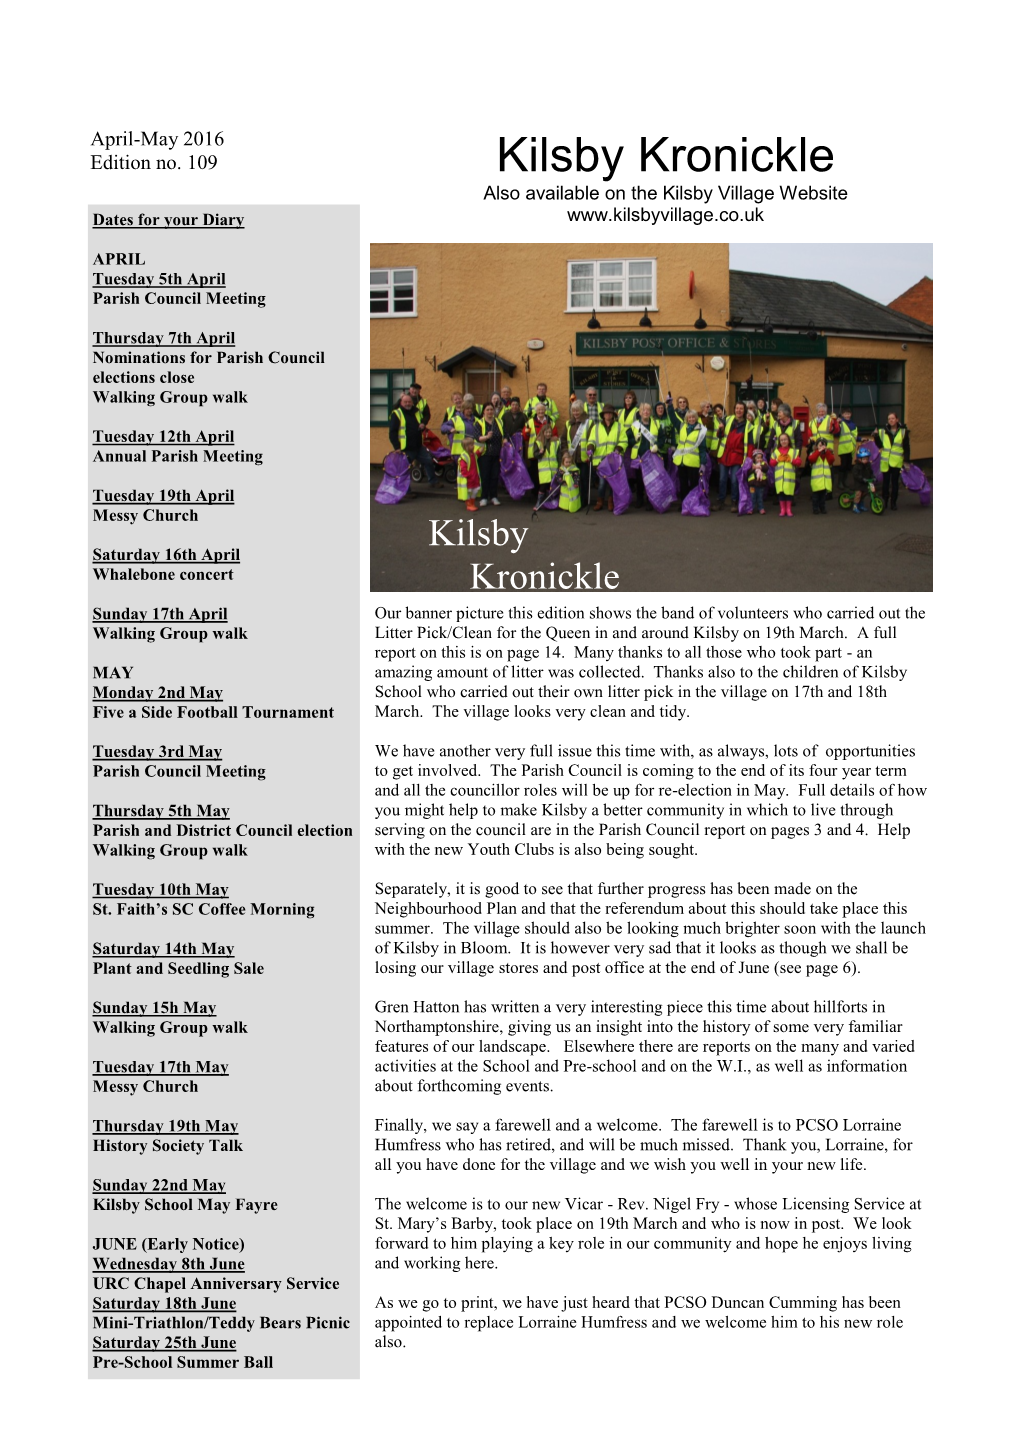 Kilsby Kronickle Also Available on the Kilsby Village Website Dates for Your Diary